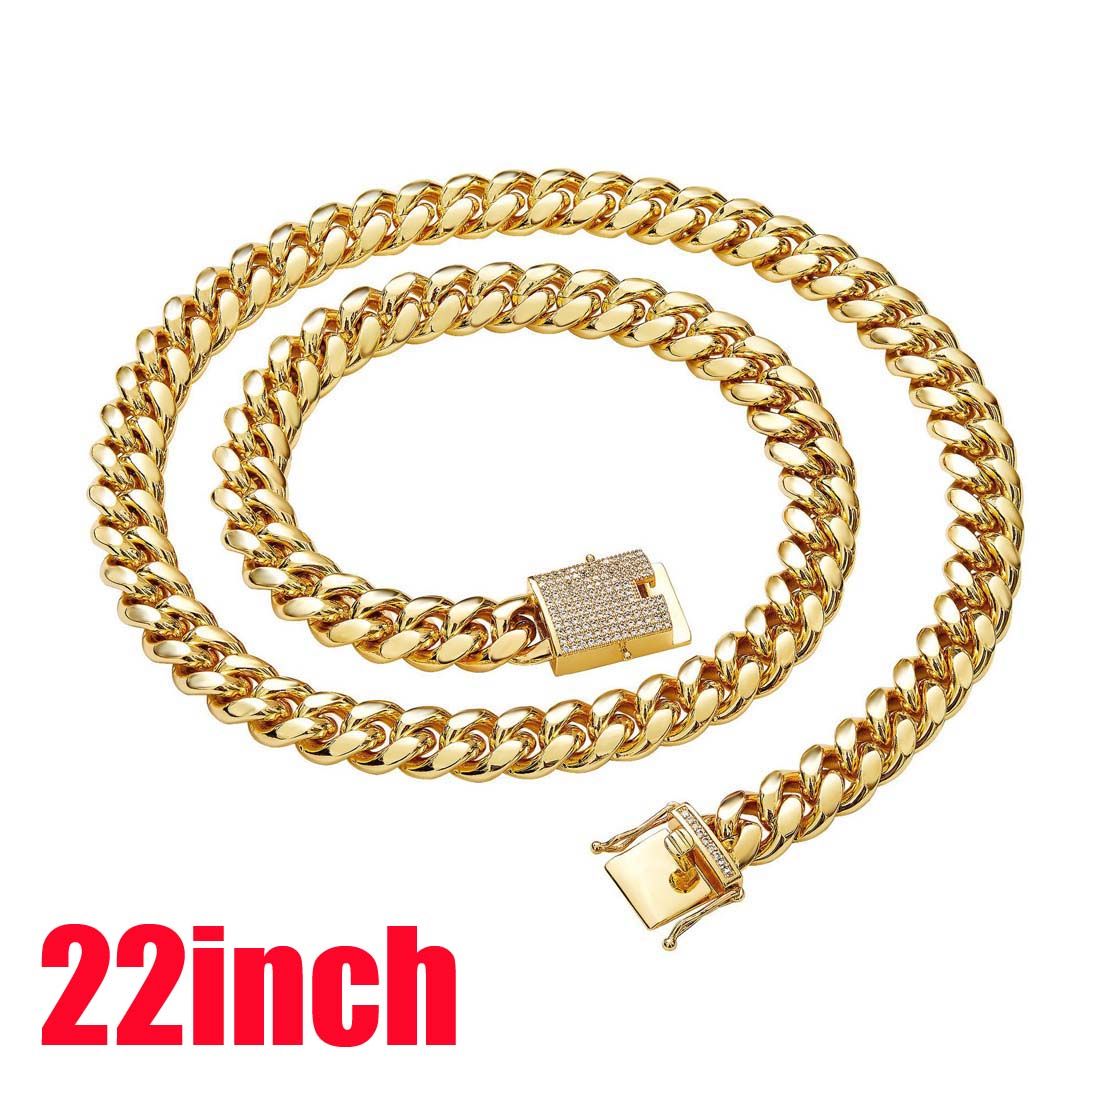 Necklace 22inch